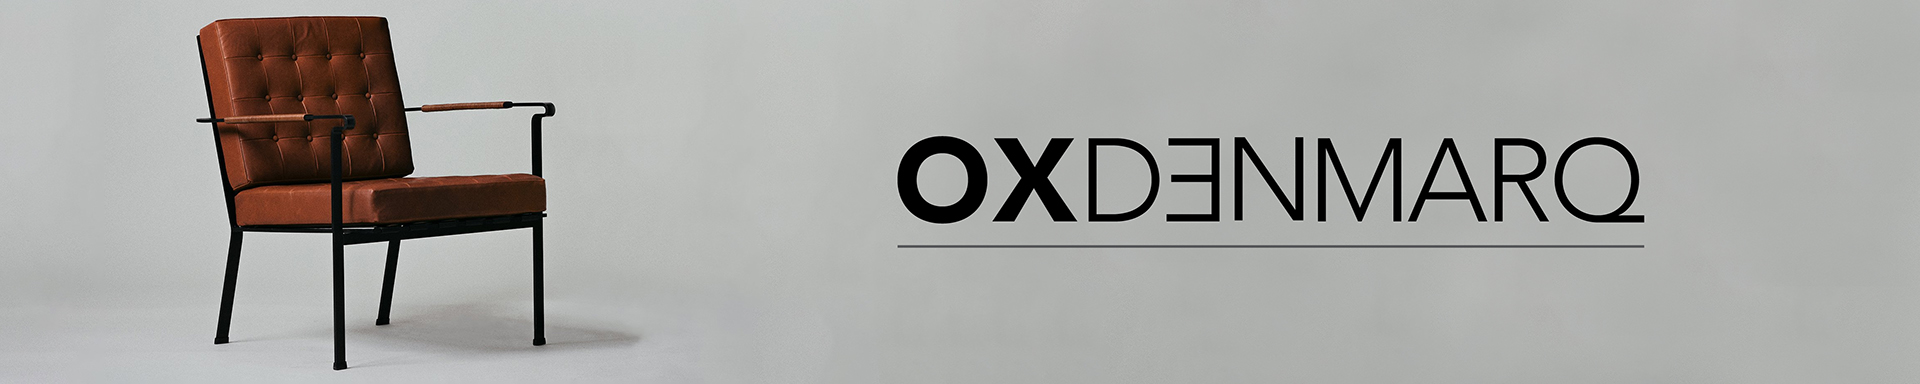 OXDENMARQ